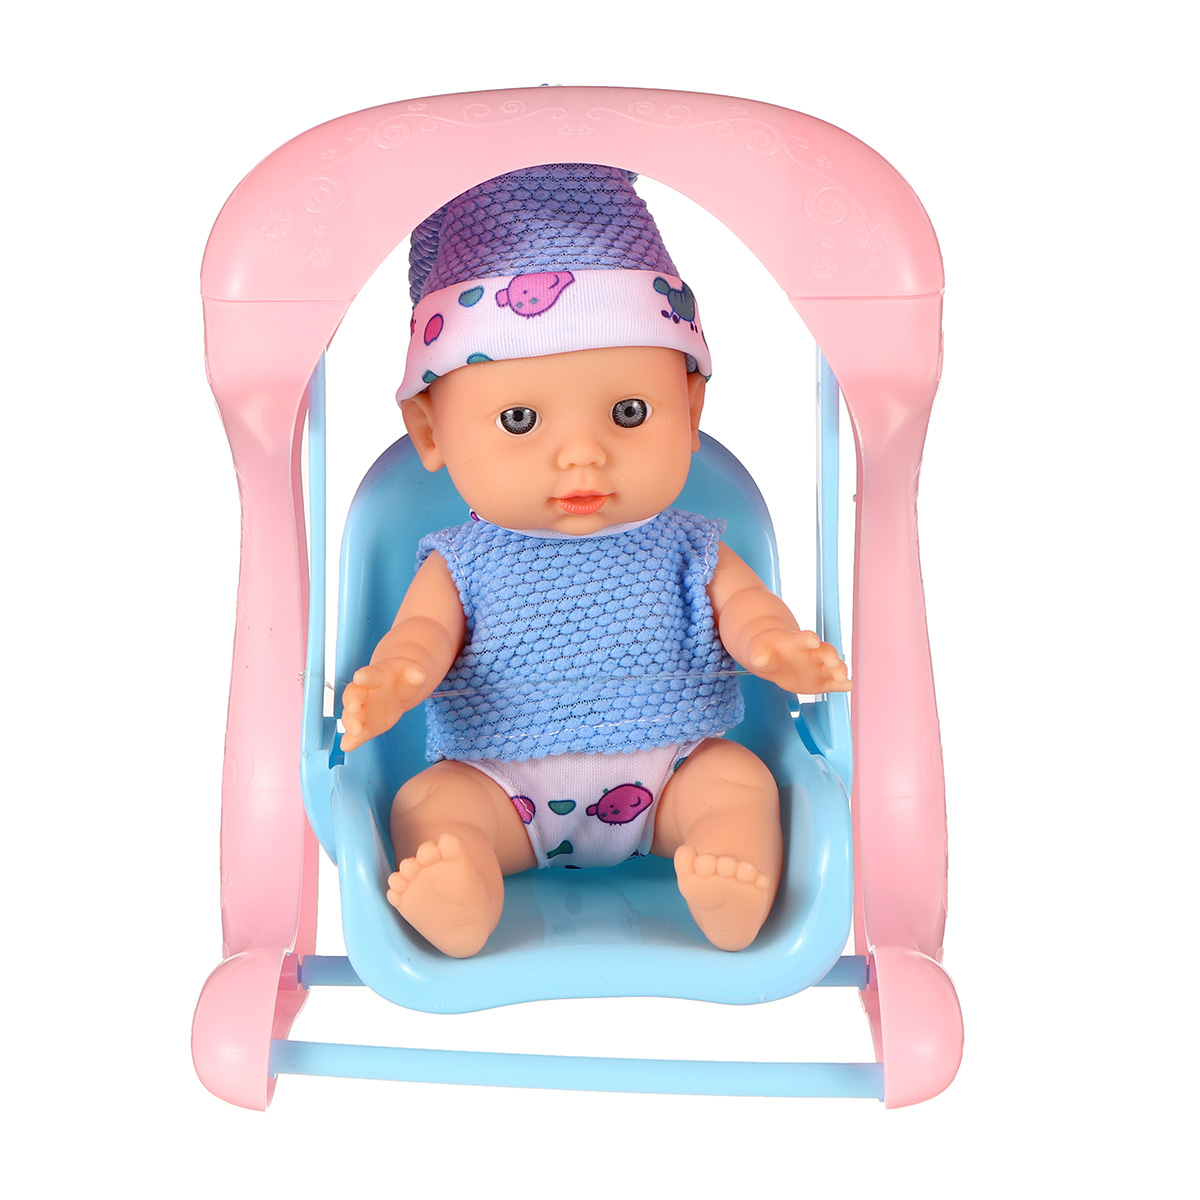 Simulation-Baby-3D-Creative-Cute-Doll-Play-House-Toy-Doll-Vinyl-Doll-Gift-1818655-18